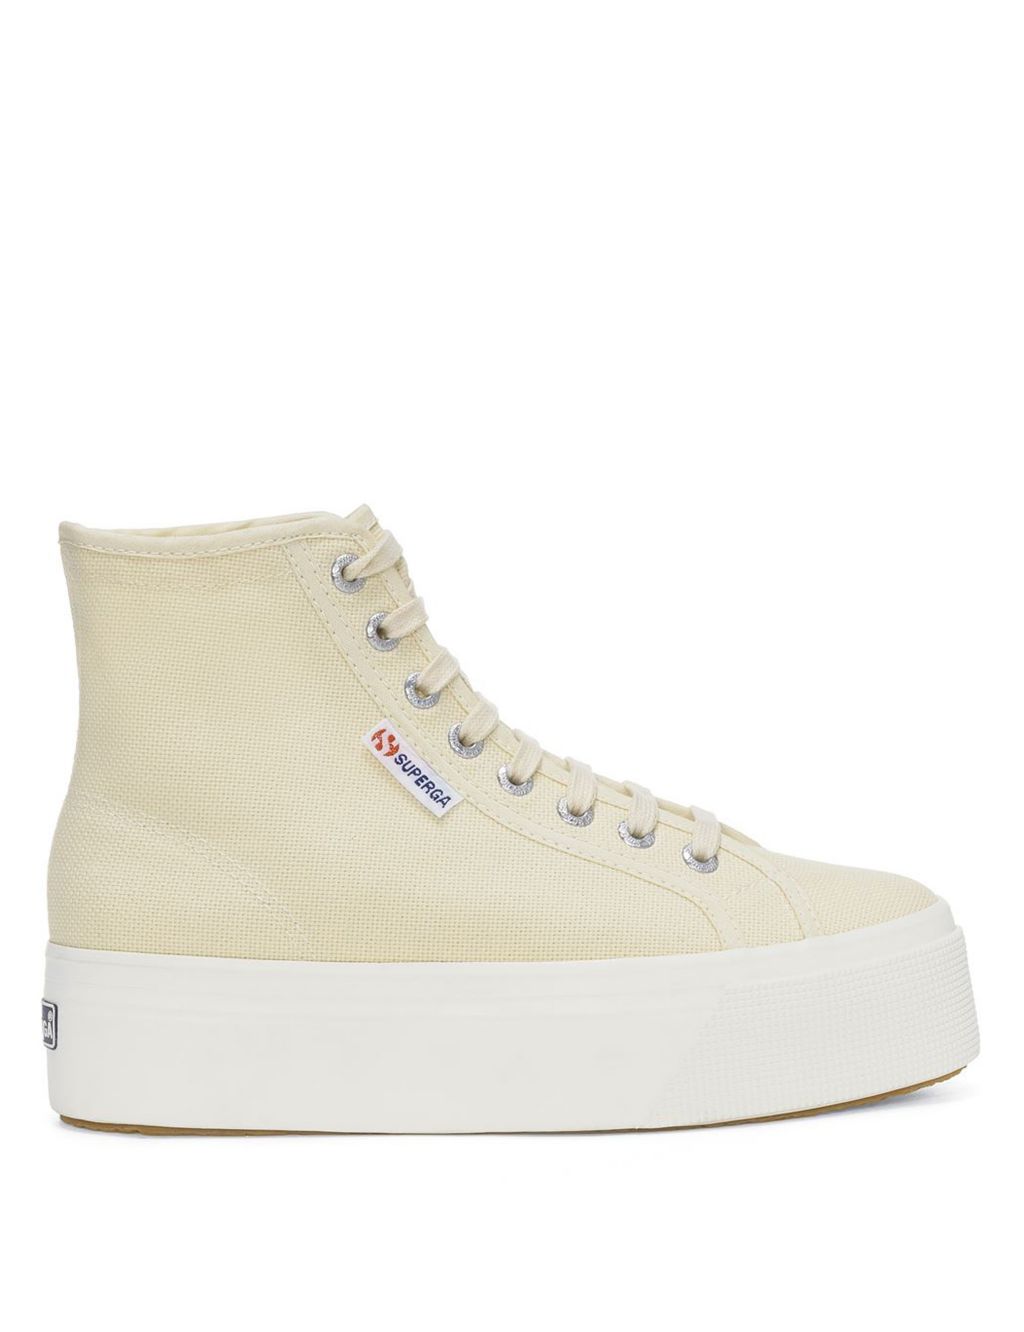 Canvas Lace Up High Top Trainers image 1